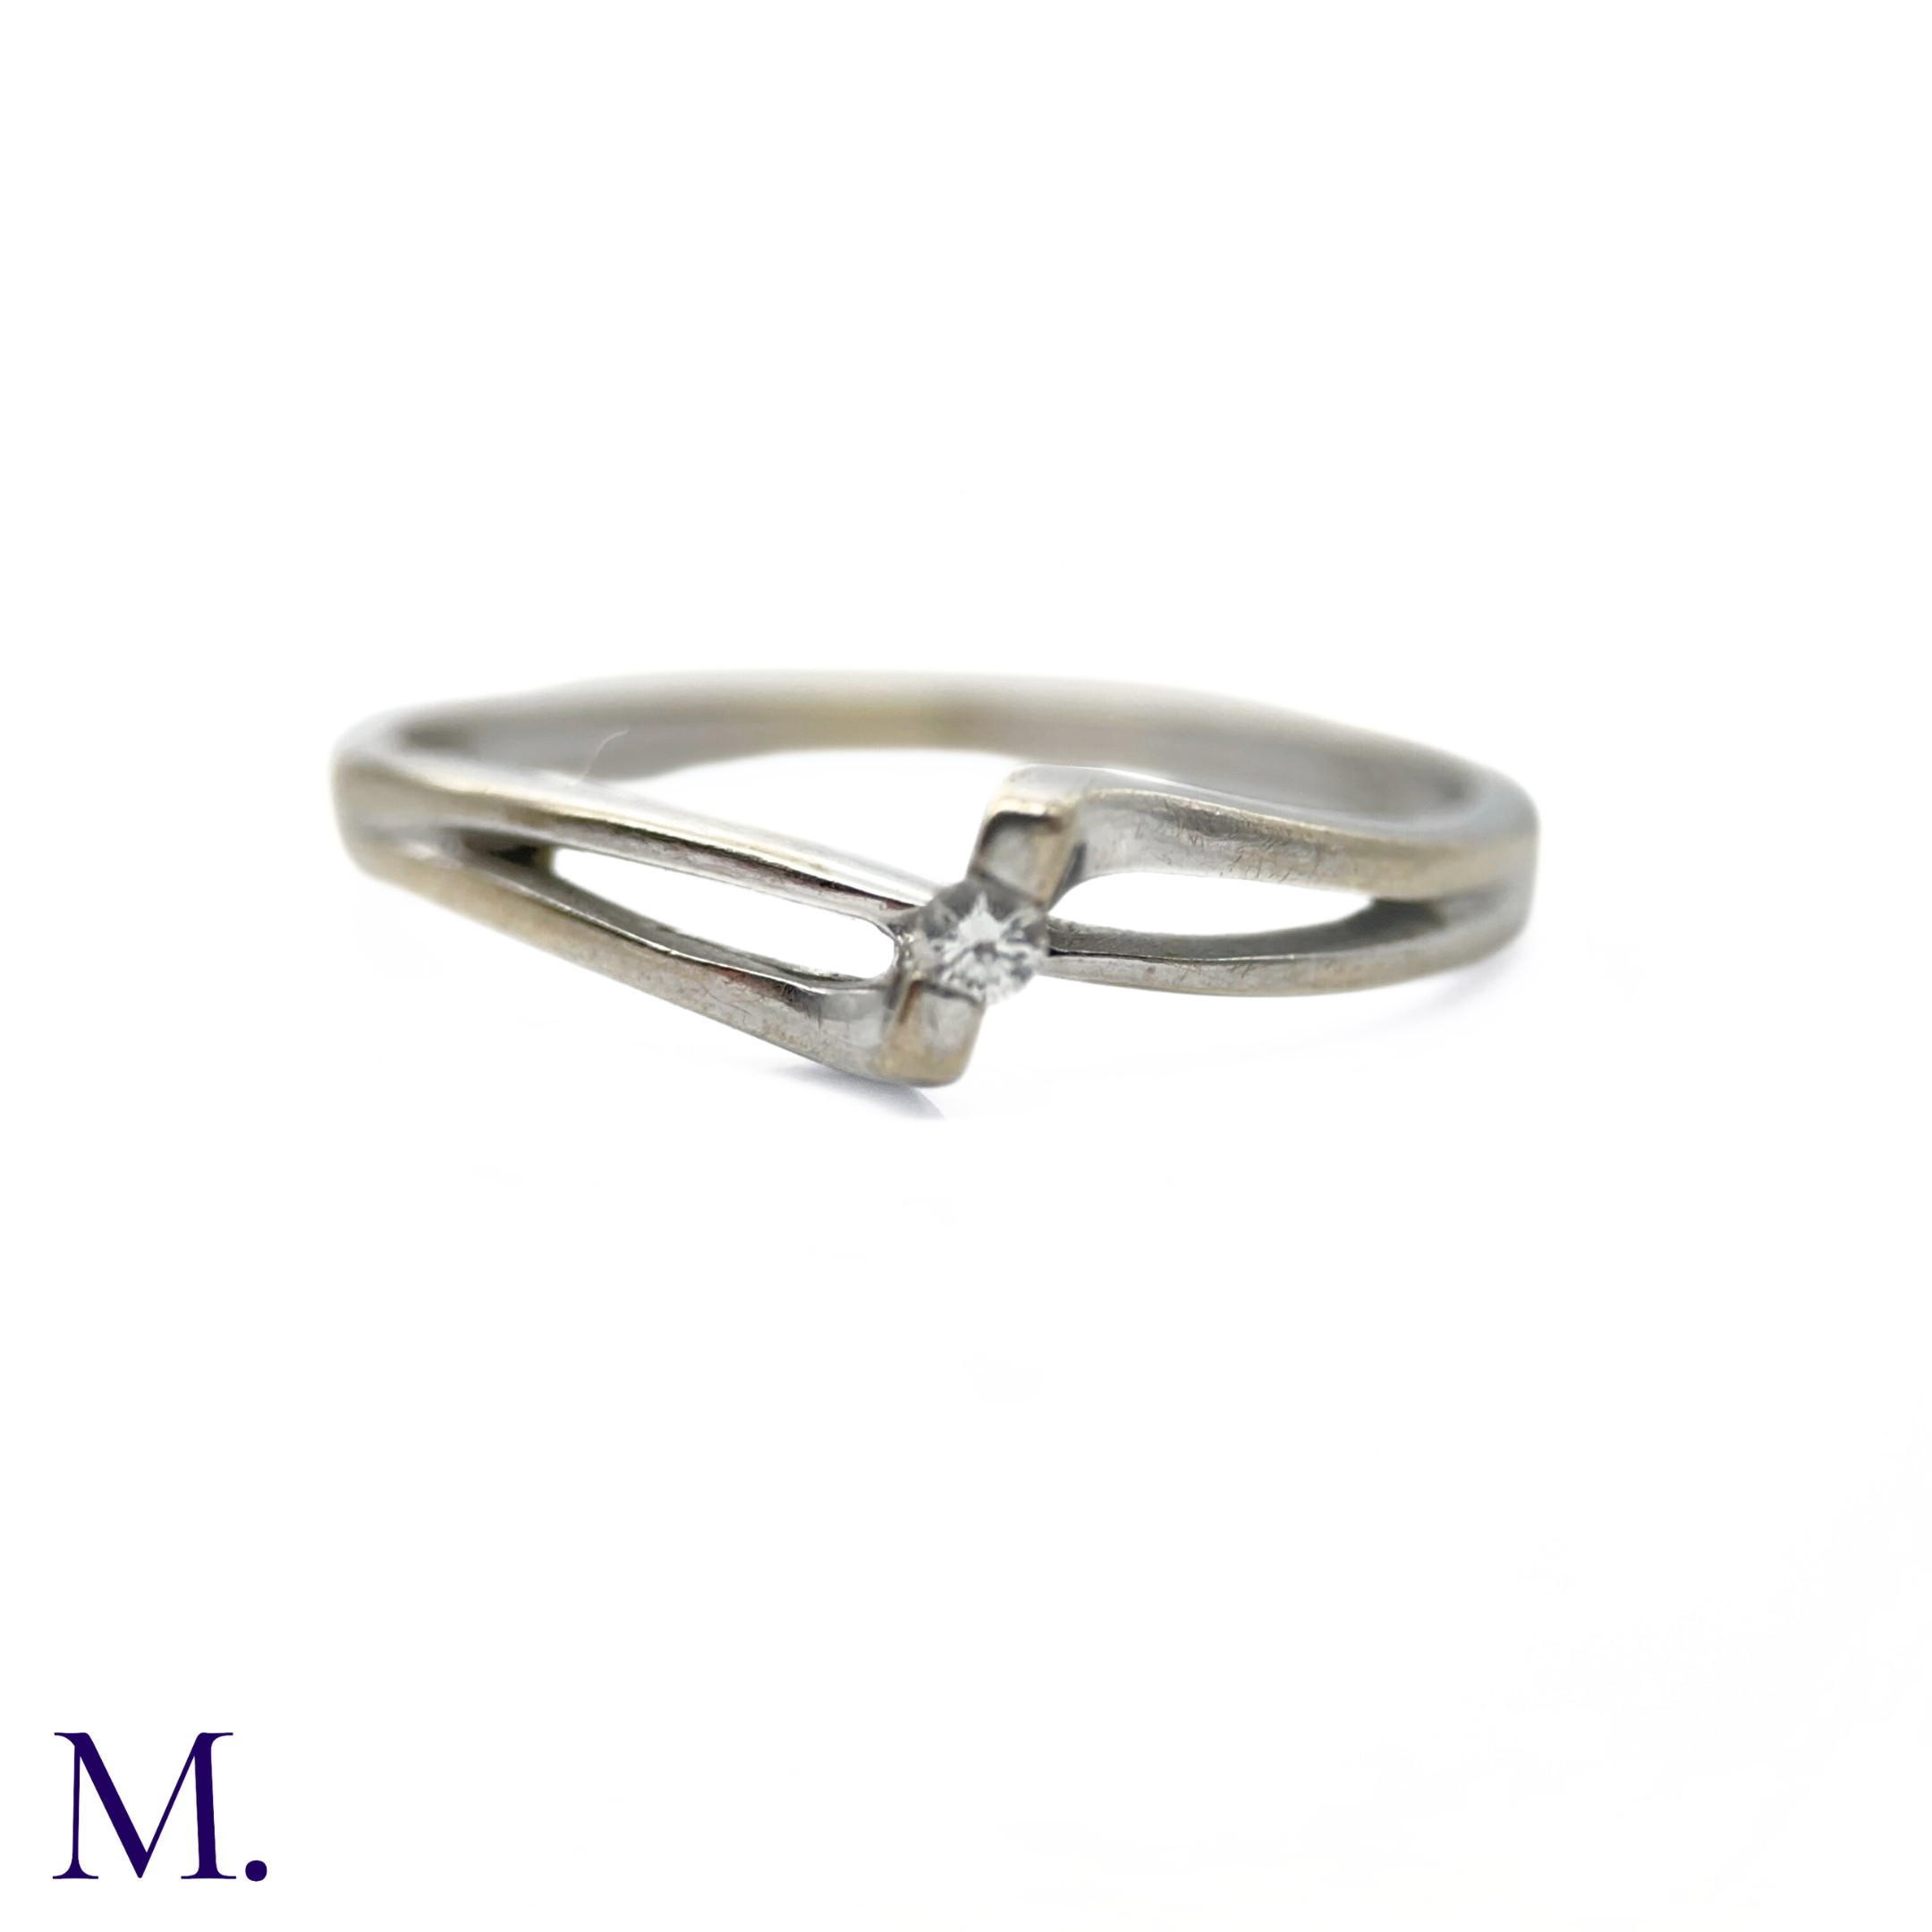 NO RESERVE - An 18ct White Gold and Diamond Ring - Image 4 of 5